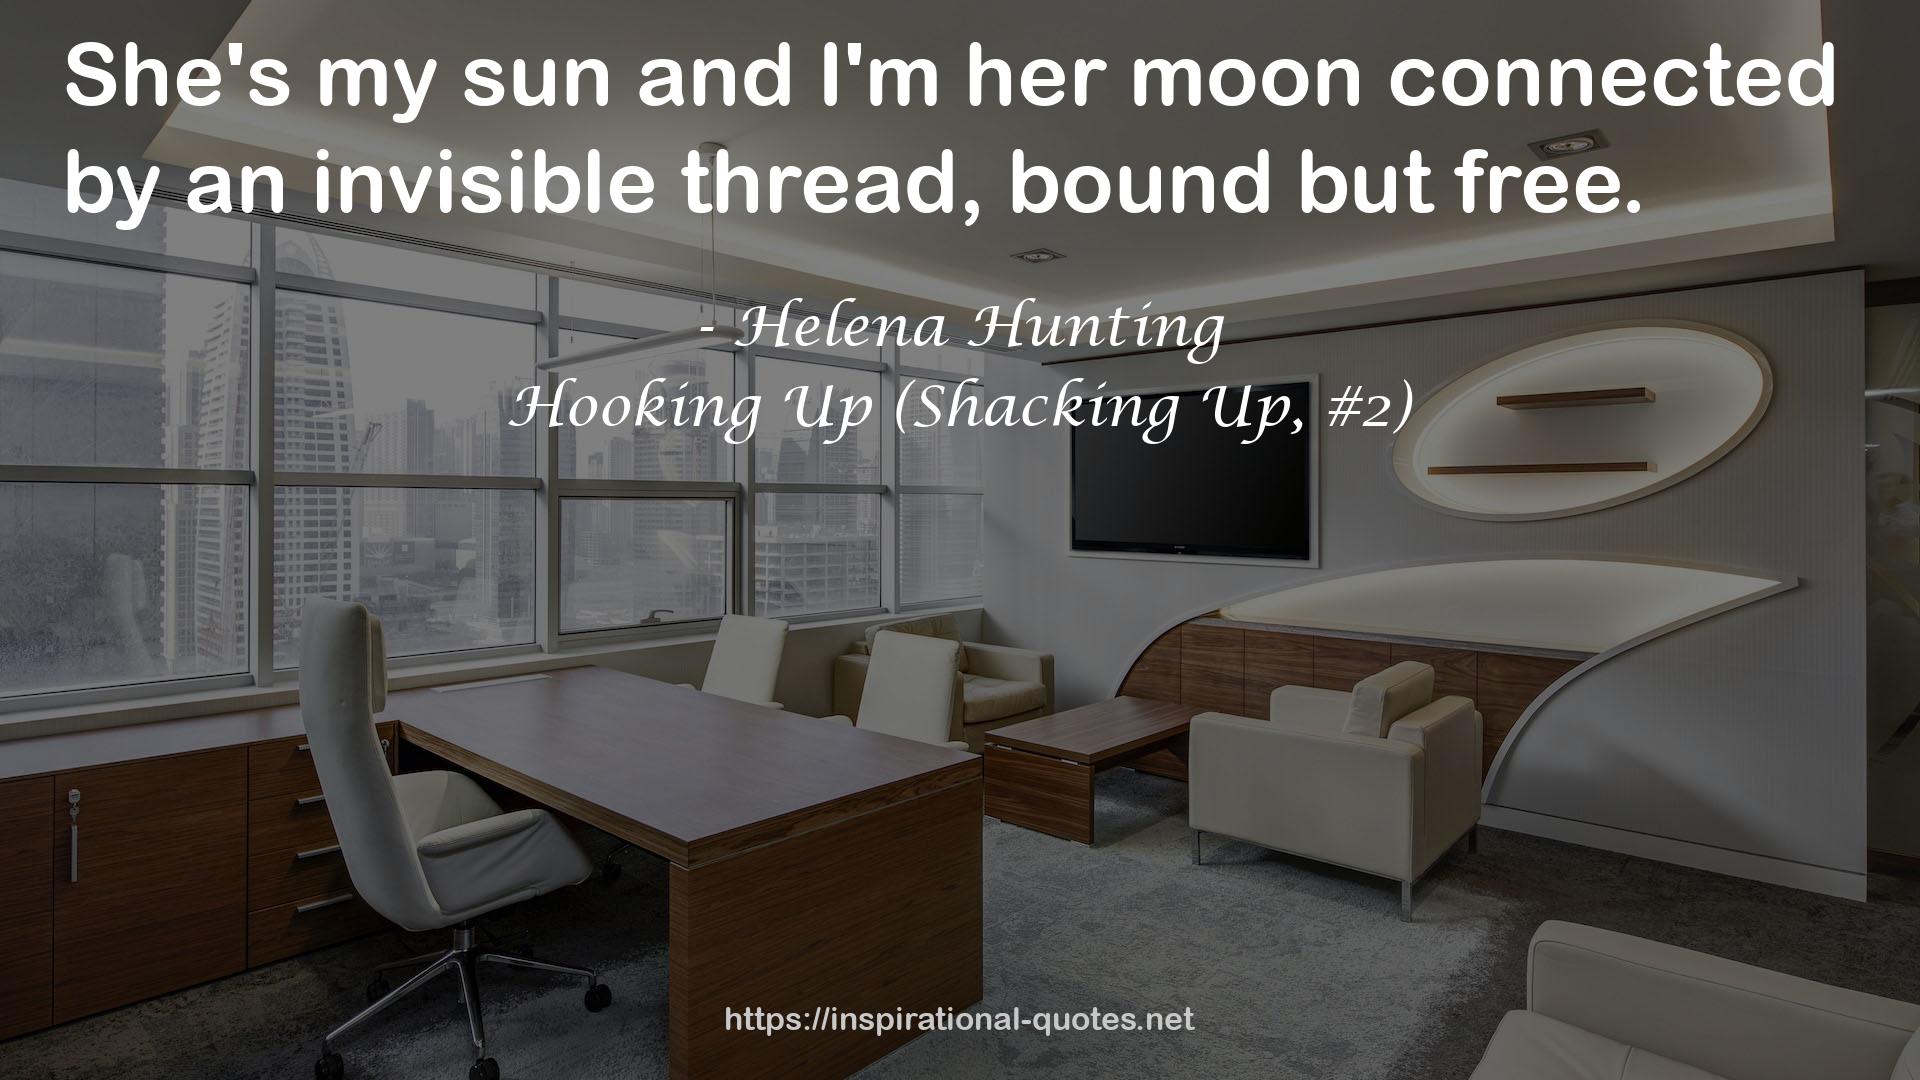 Hooking Up (Shacking Up, #2) QUOTES